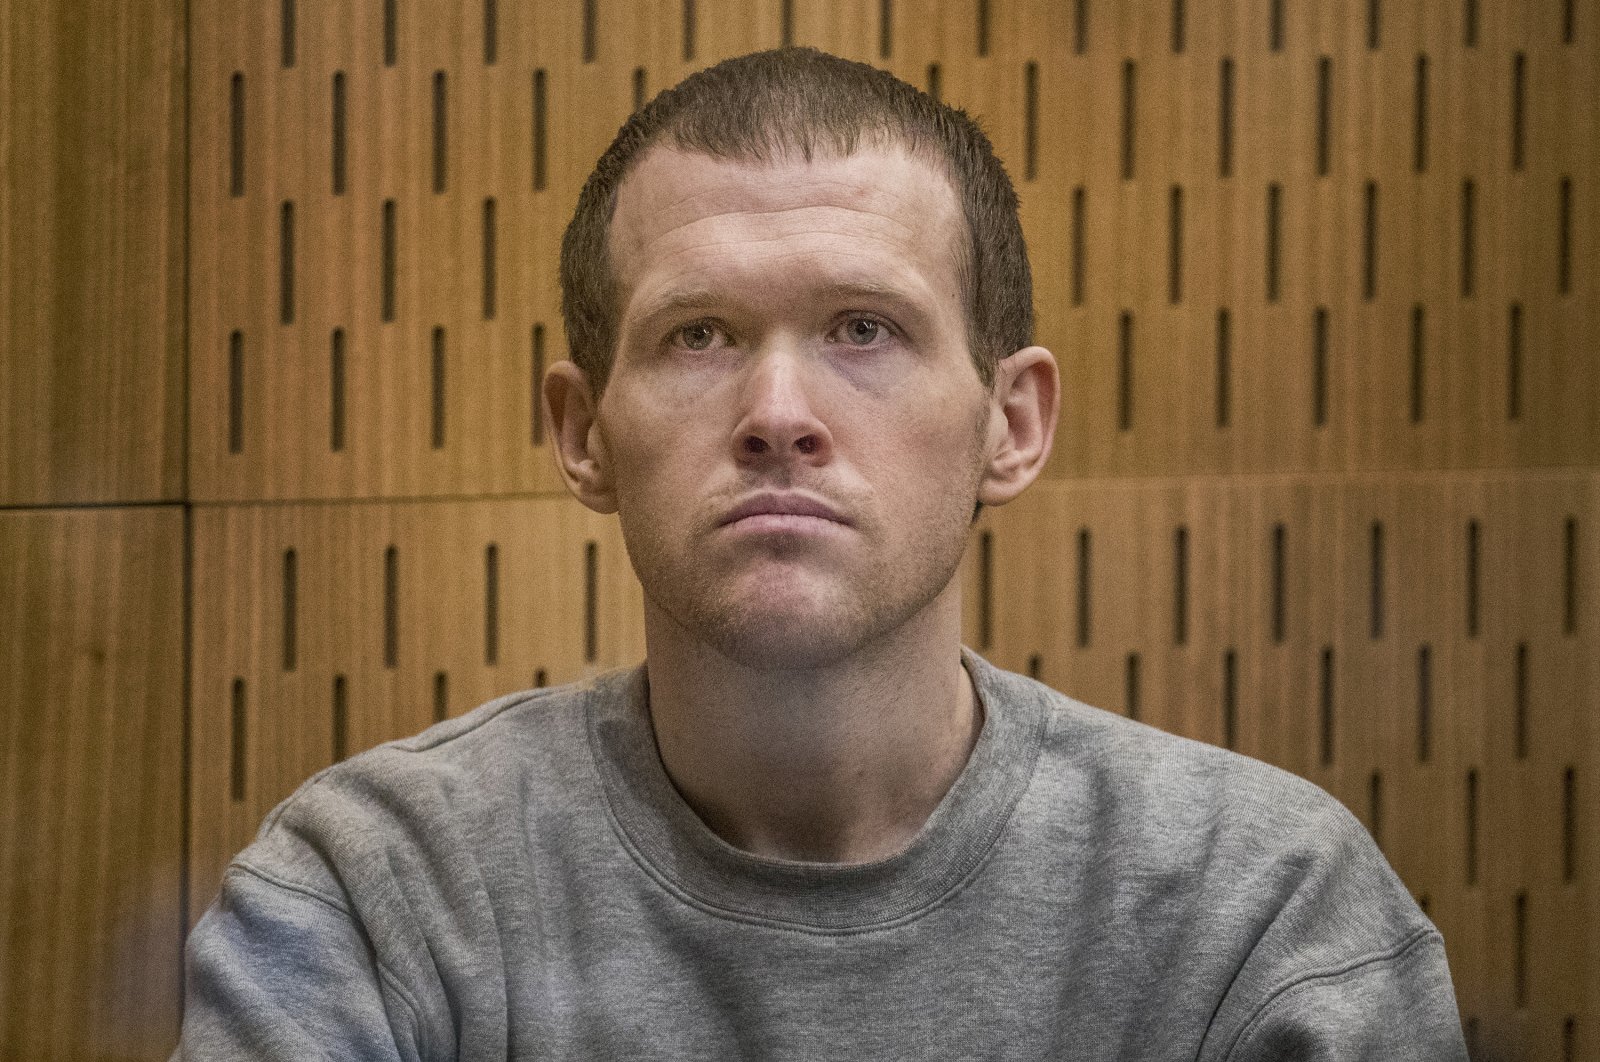 Brenton Tarrant sits in the dock at the Christchurch High Court for day two of sentencing, Christchurch, Aug. 25, 2020. (AP Photo)